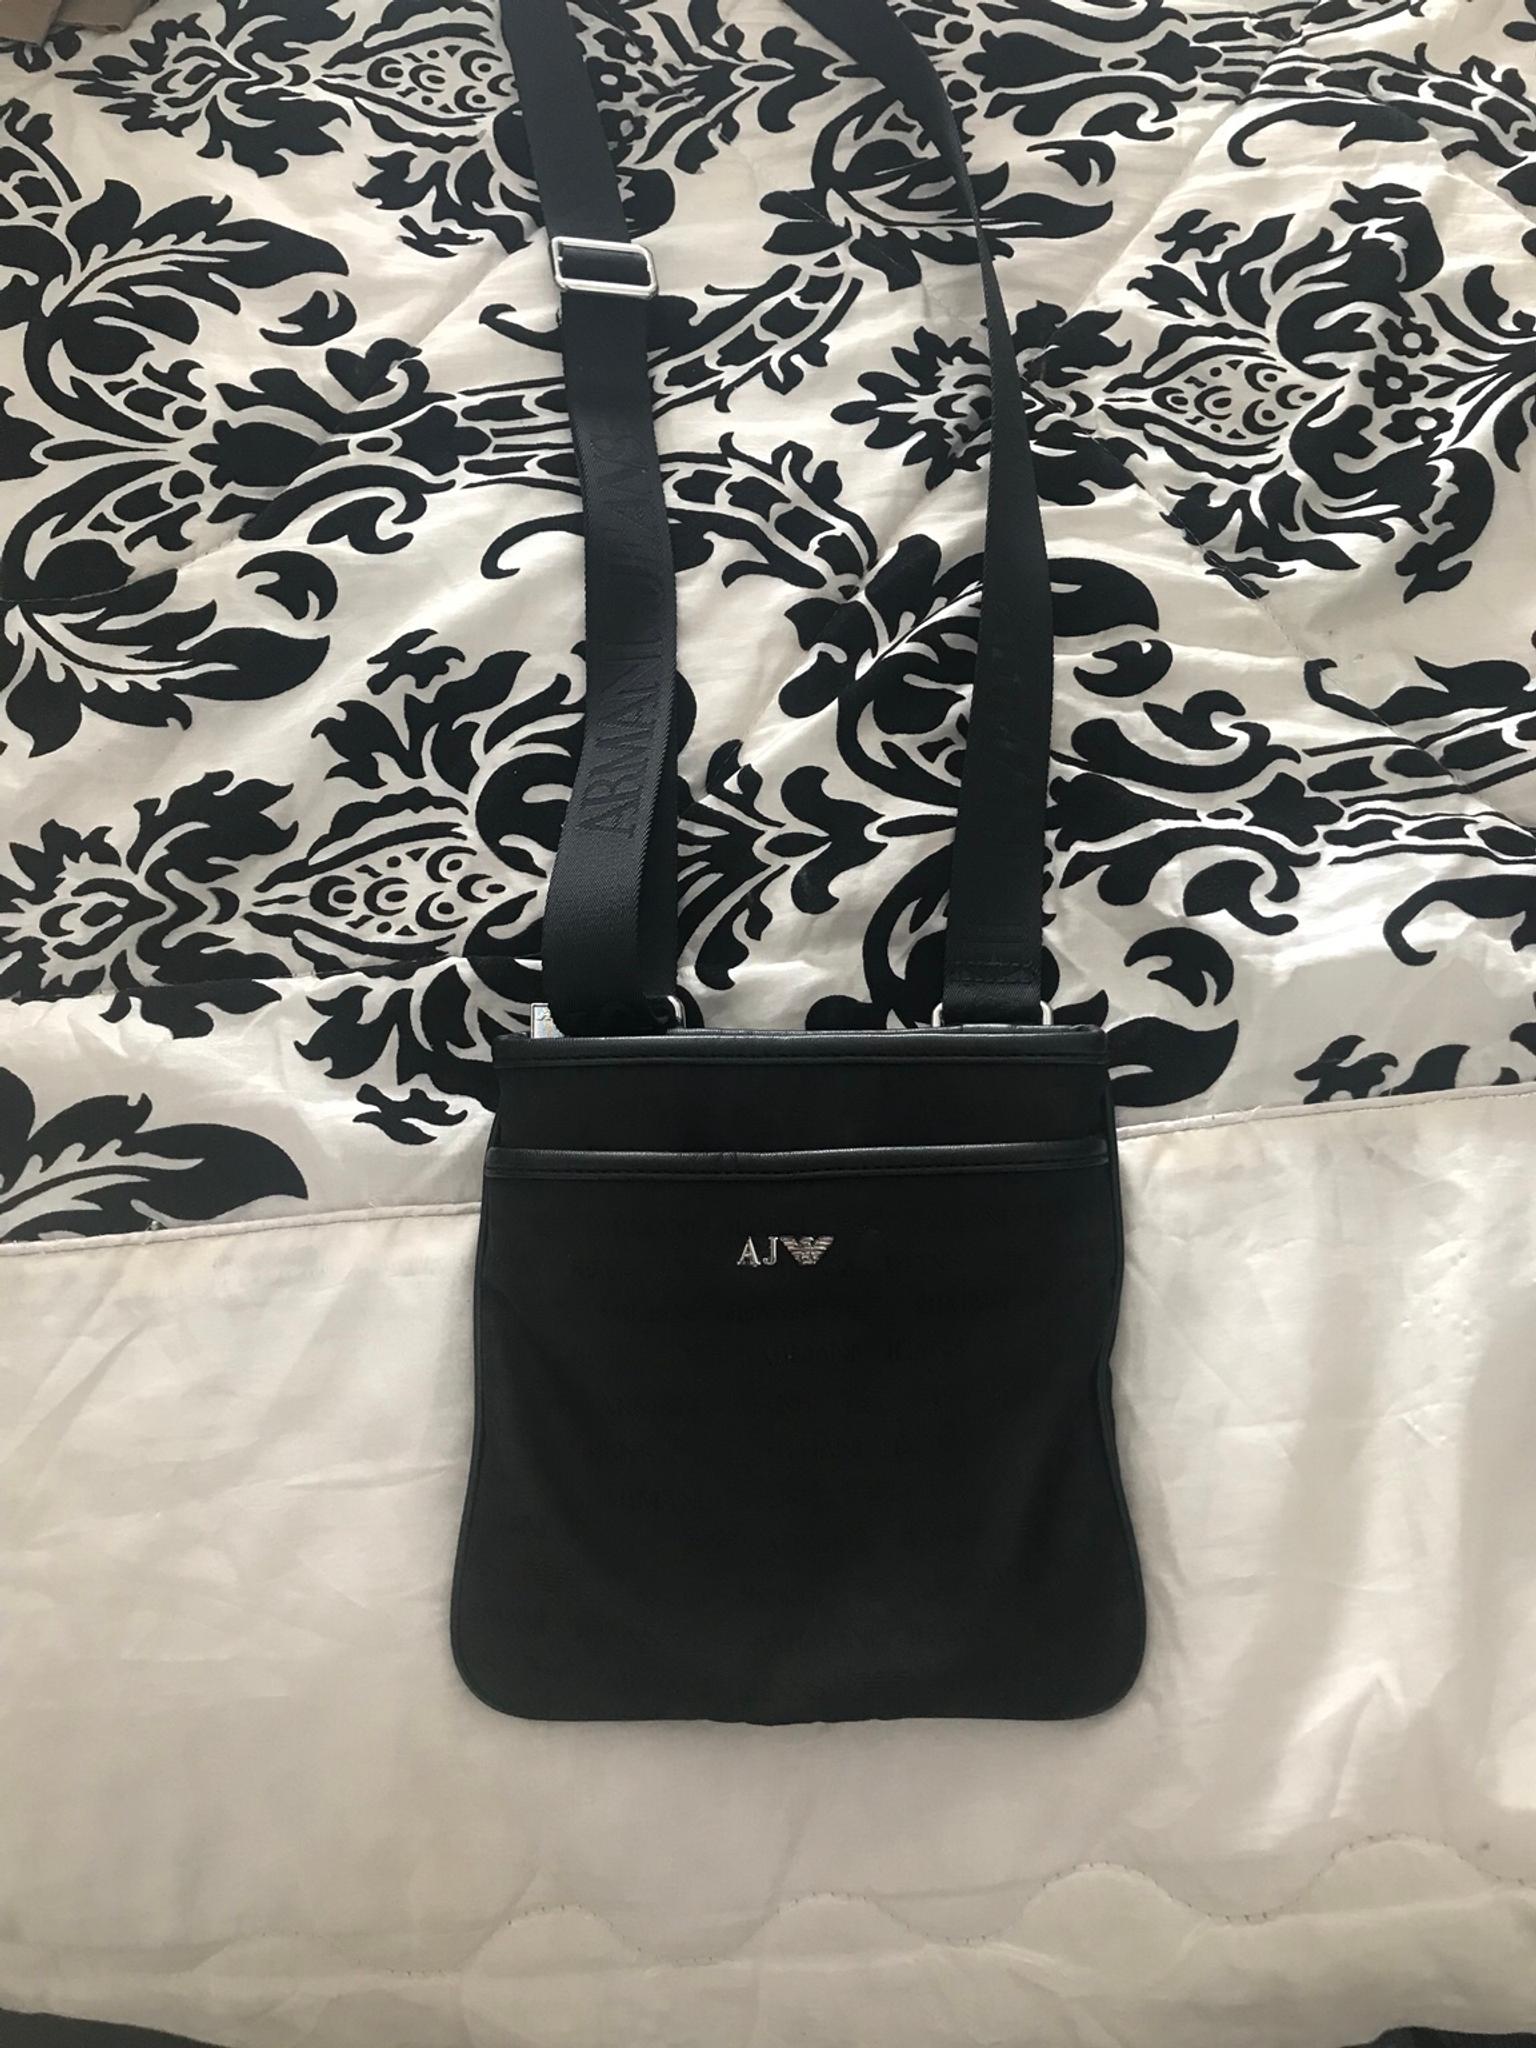 Armani man bag in Coventry for £40.00 